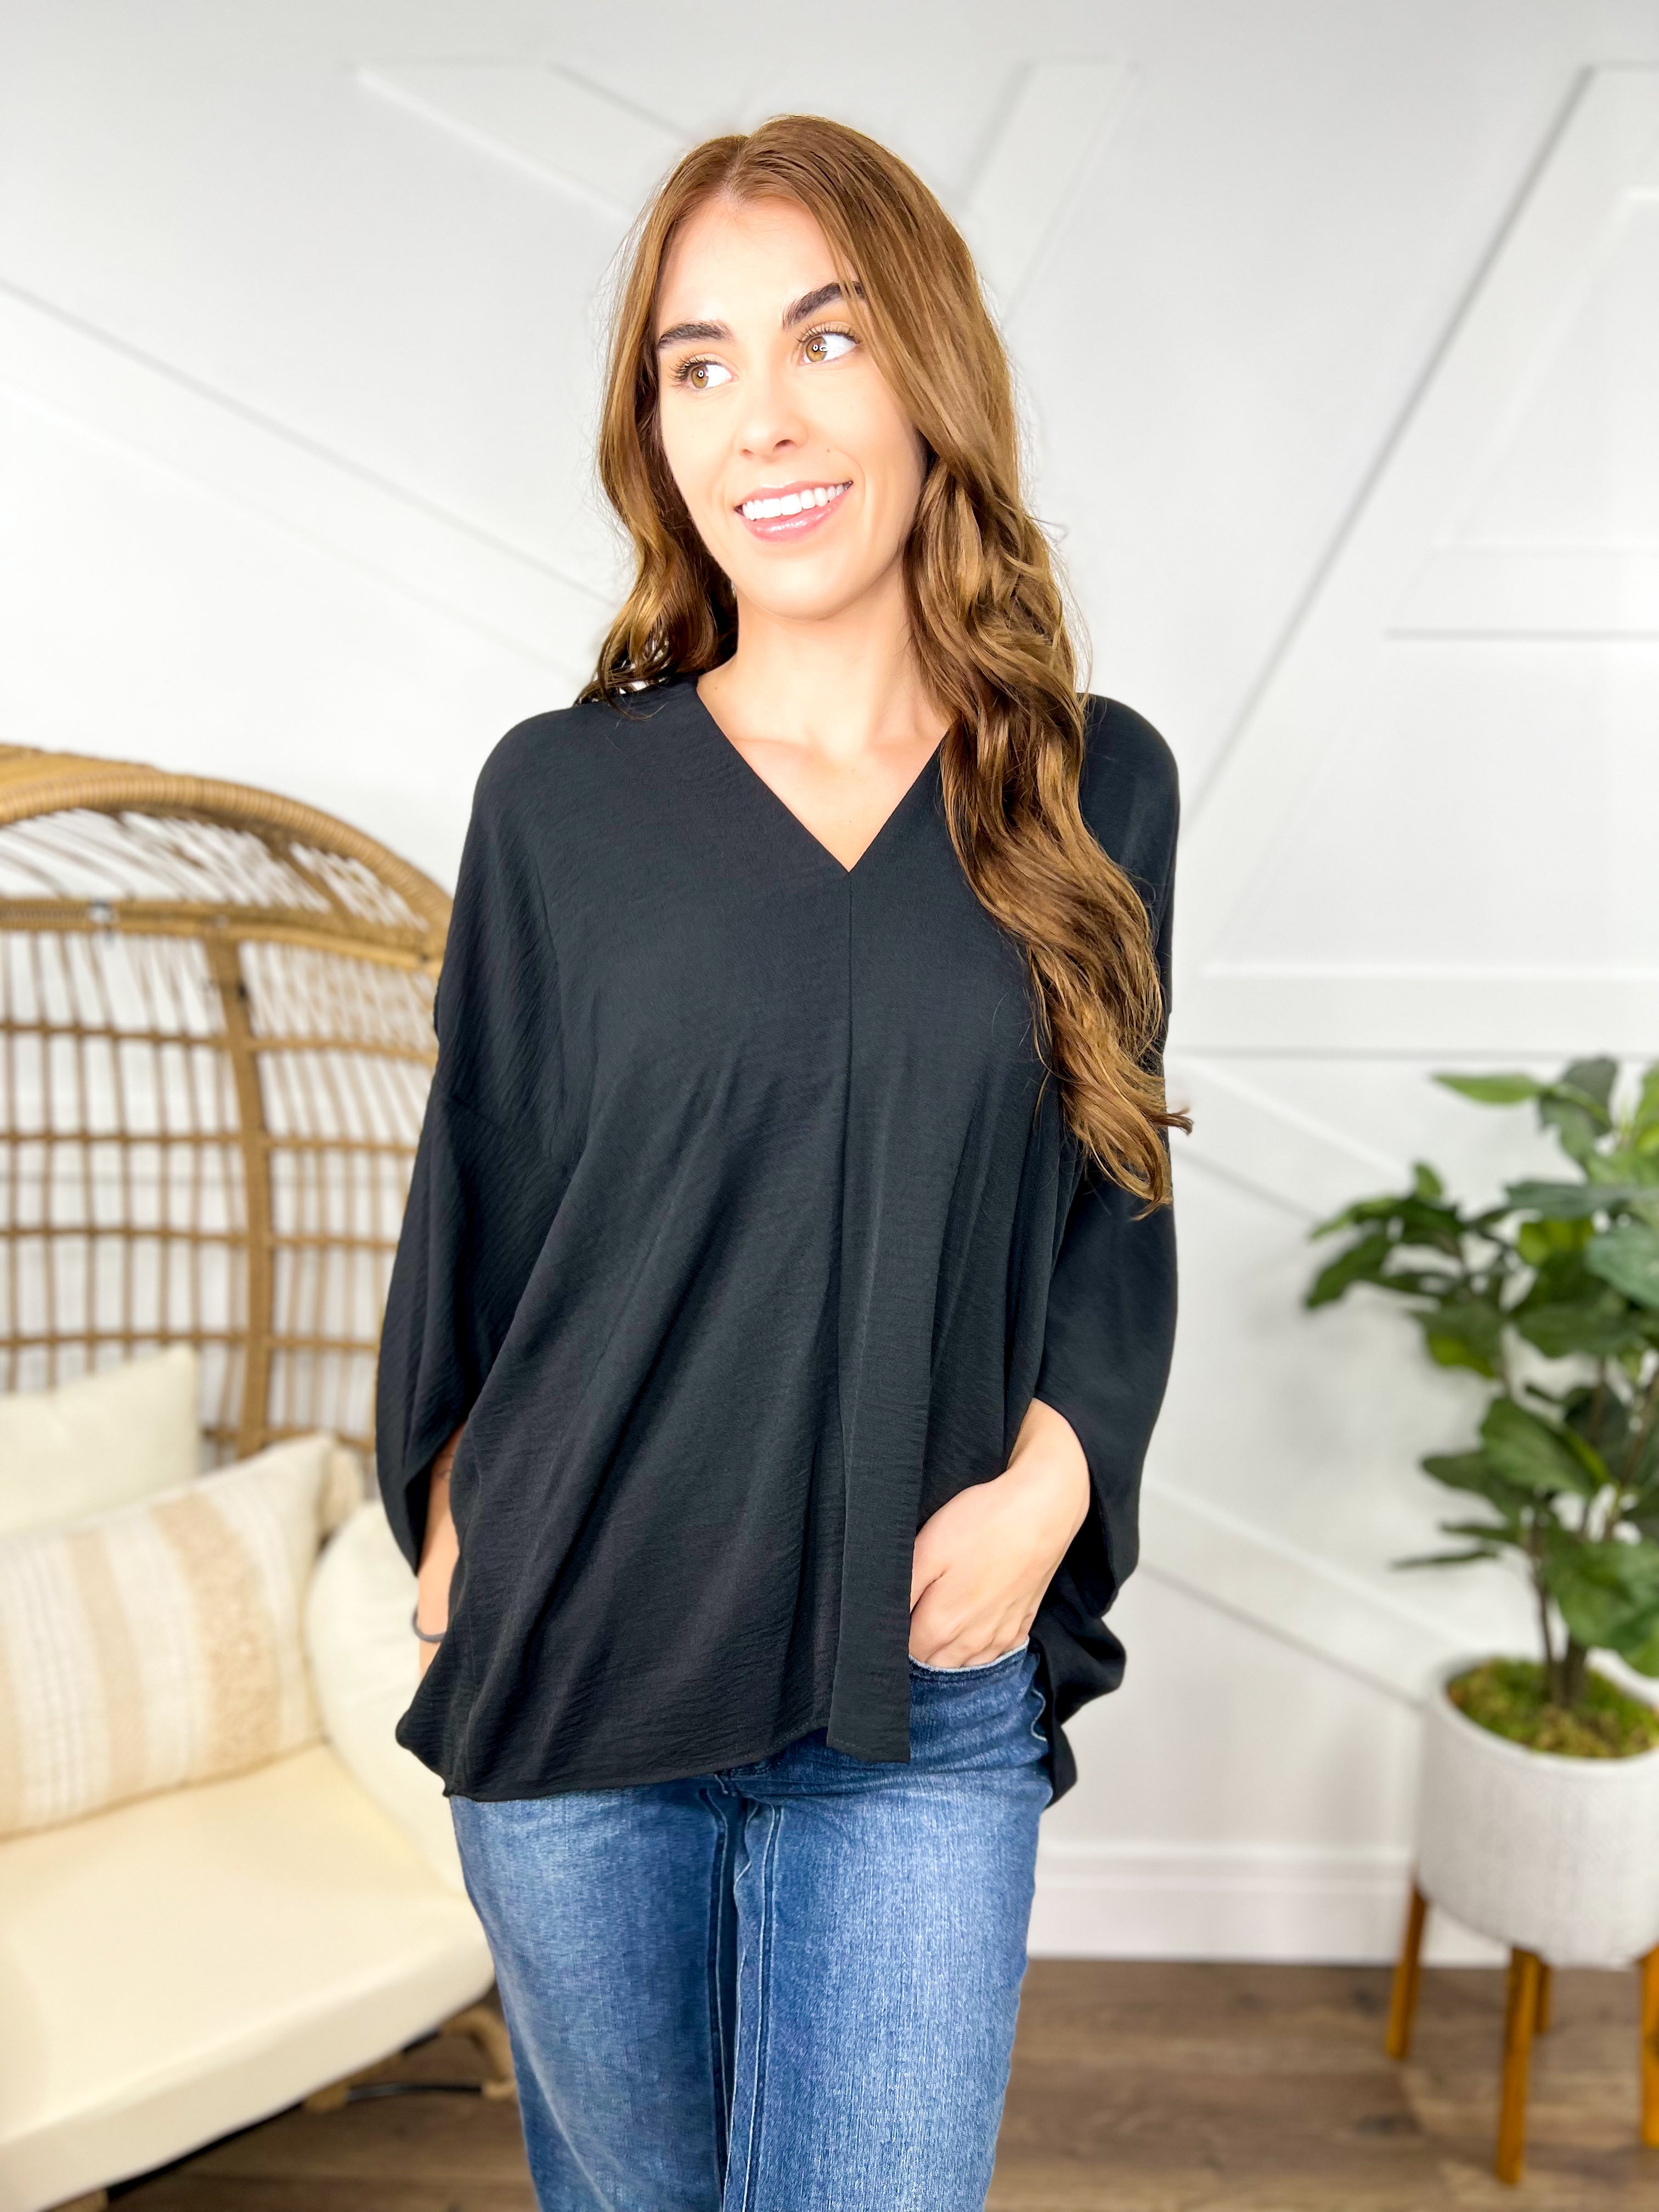 RESTOCK: All Business Top-110 Short Sleeve Top-First Love-Heathered Boho Boutique, Women's Fashion and Accessories in Palmetto, FL